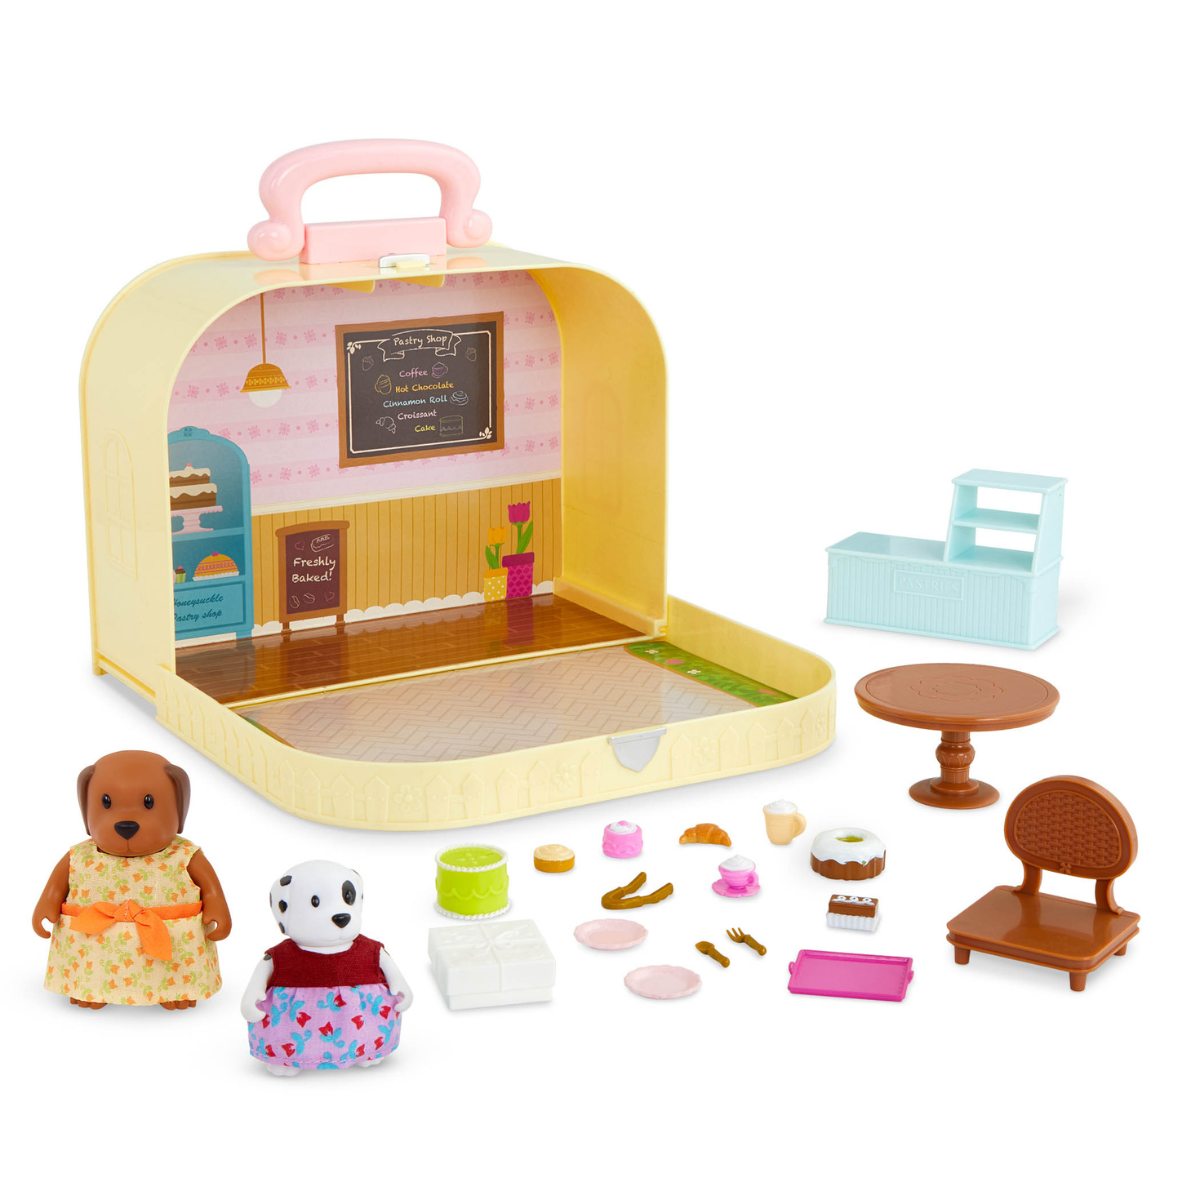 Pastry Shop Suitcase Playset